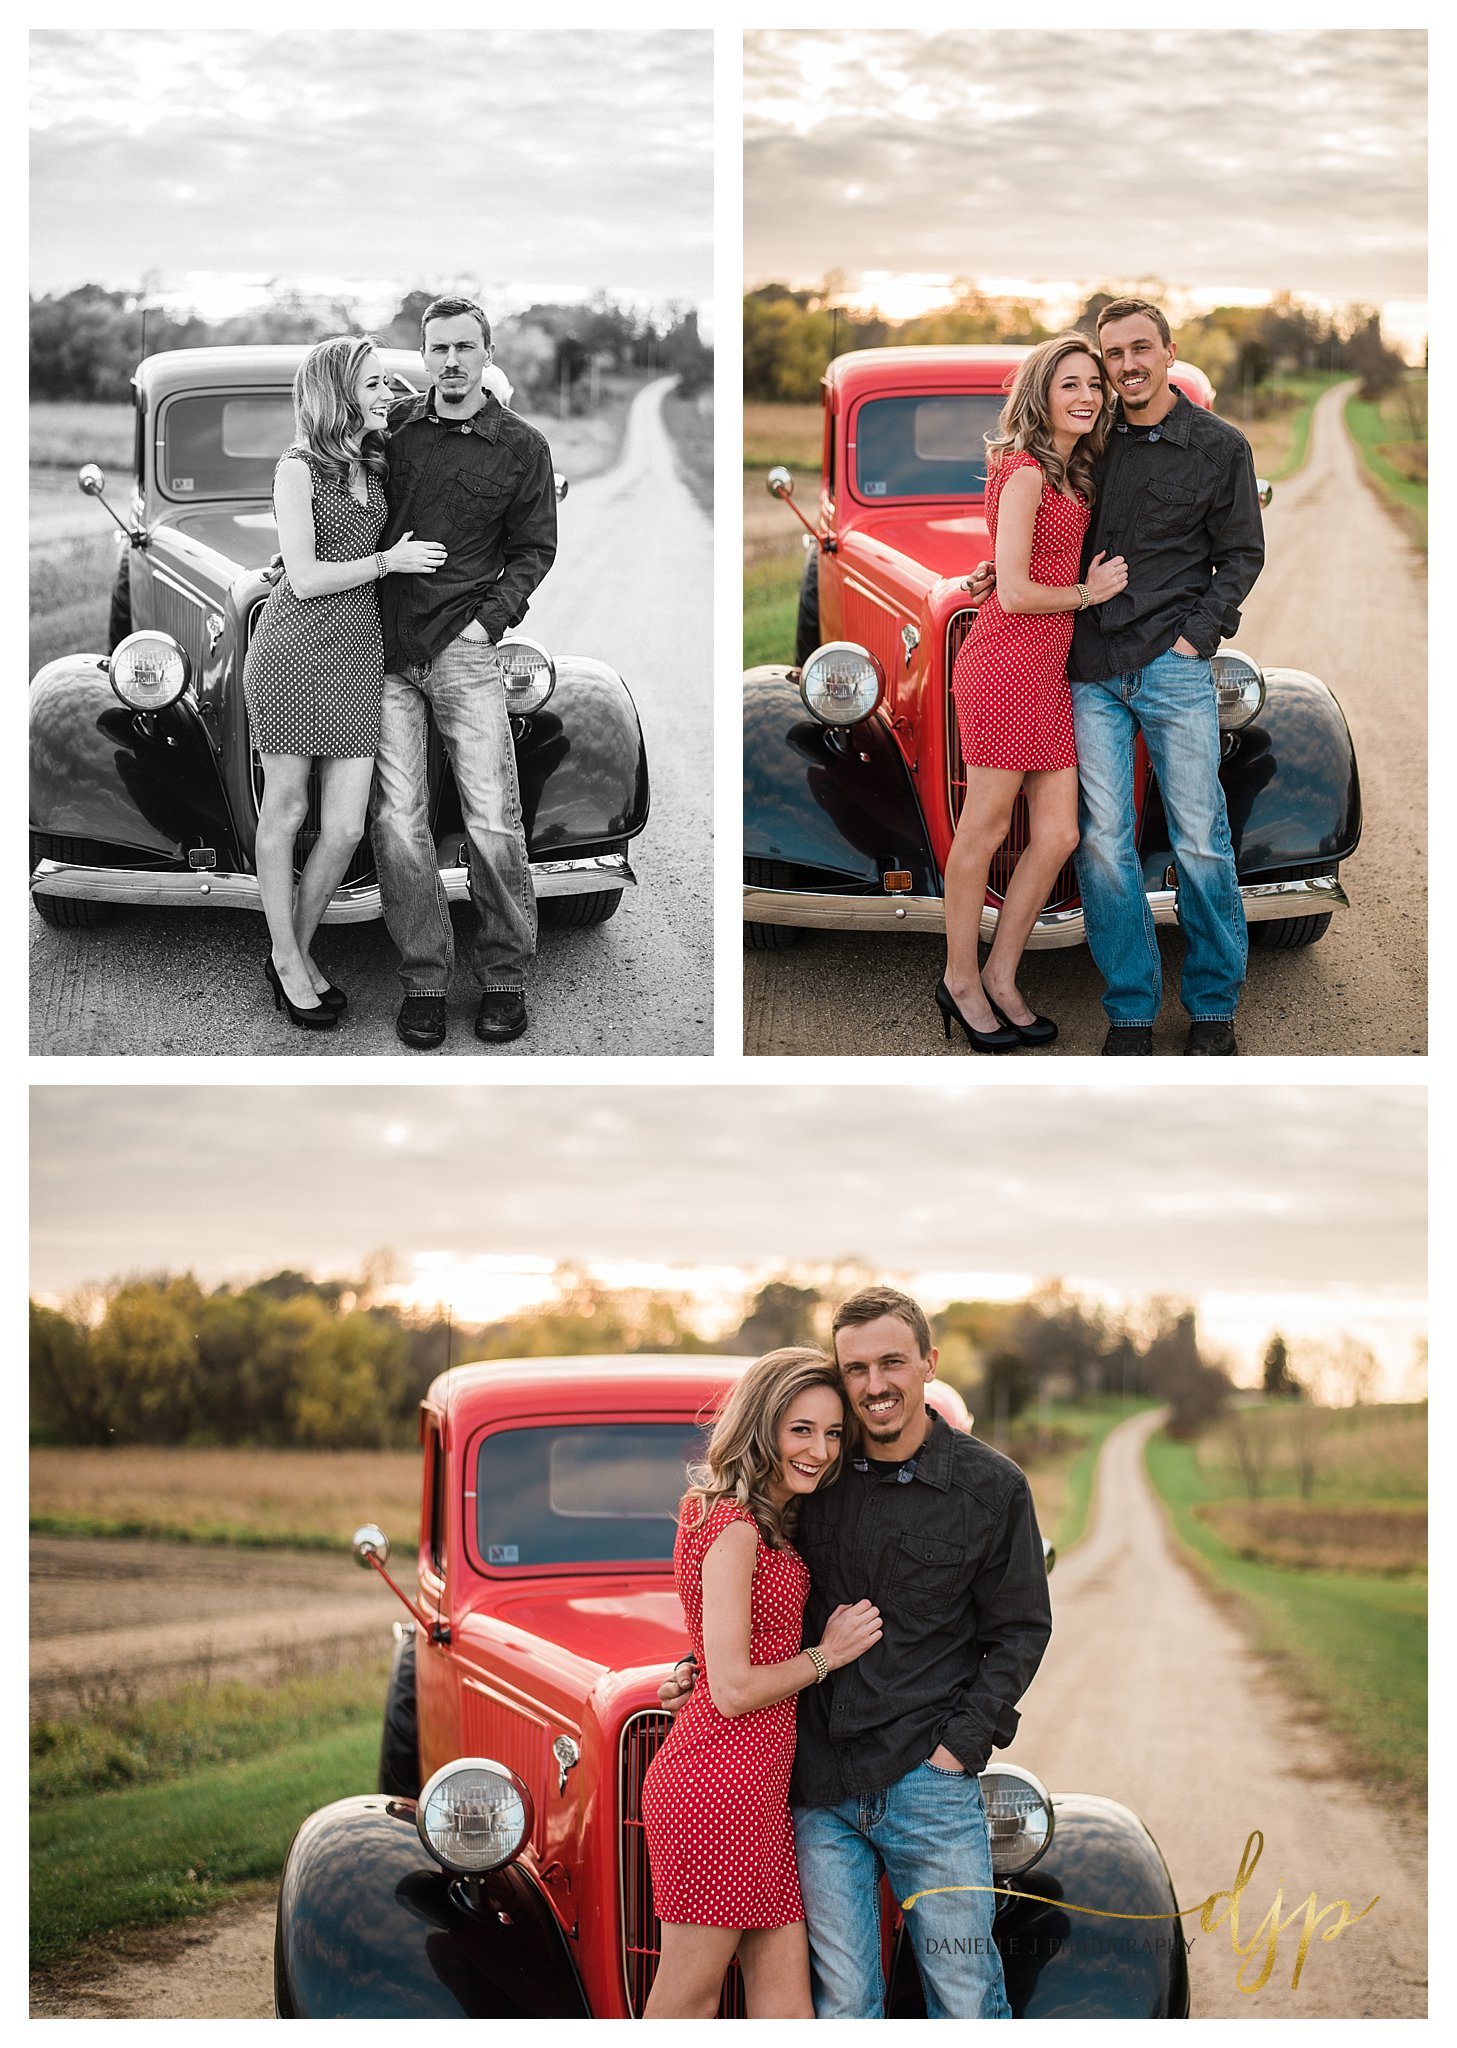 Central Minnesota vintage inspired classic car engagement session.